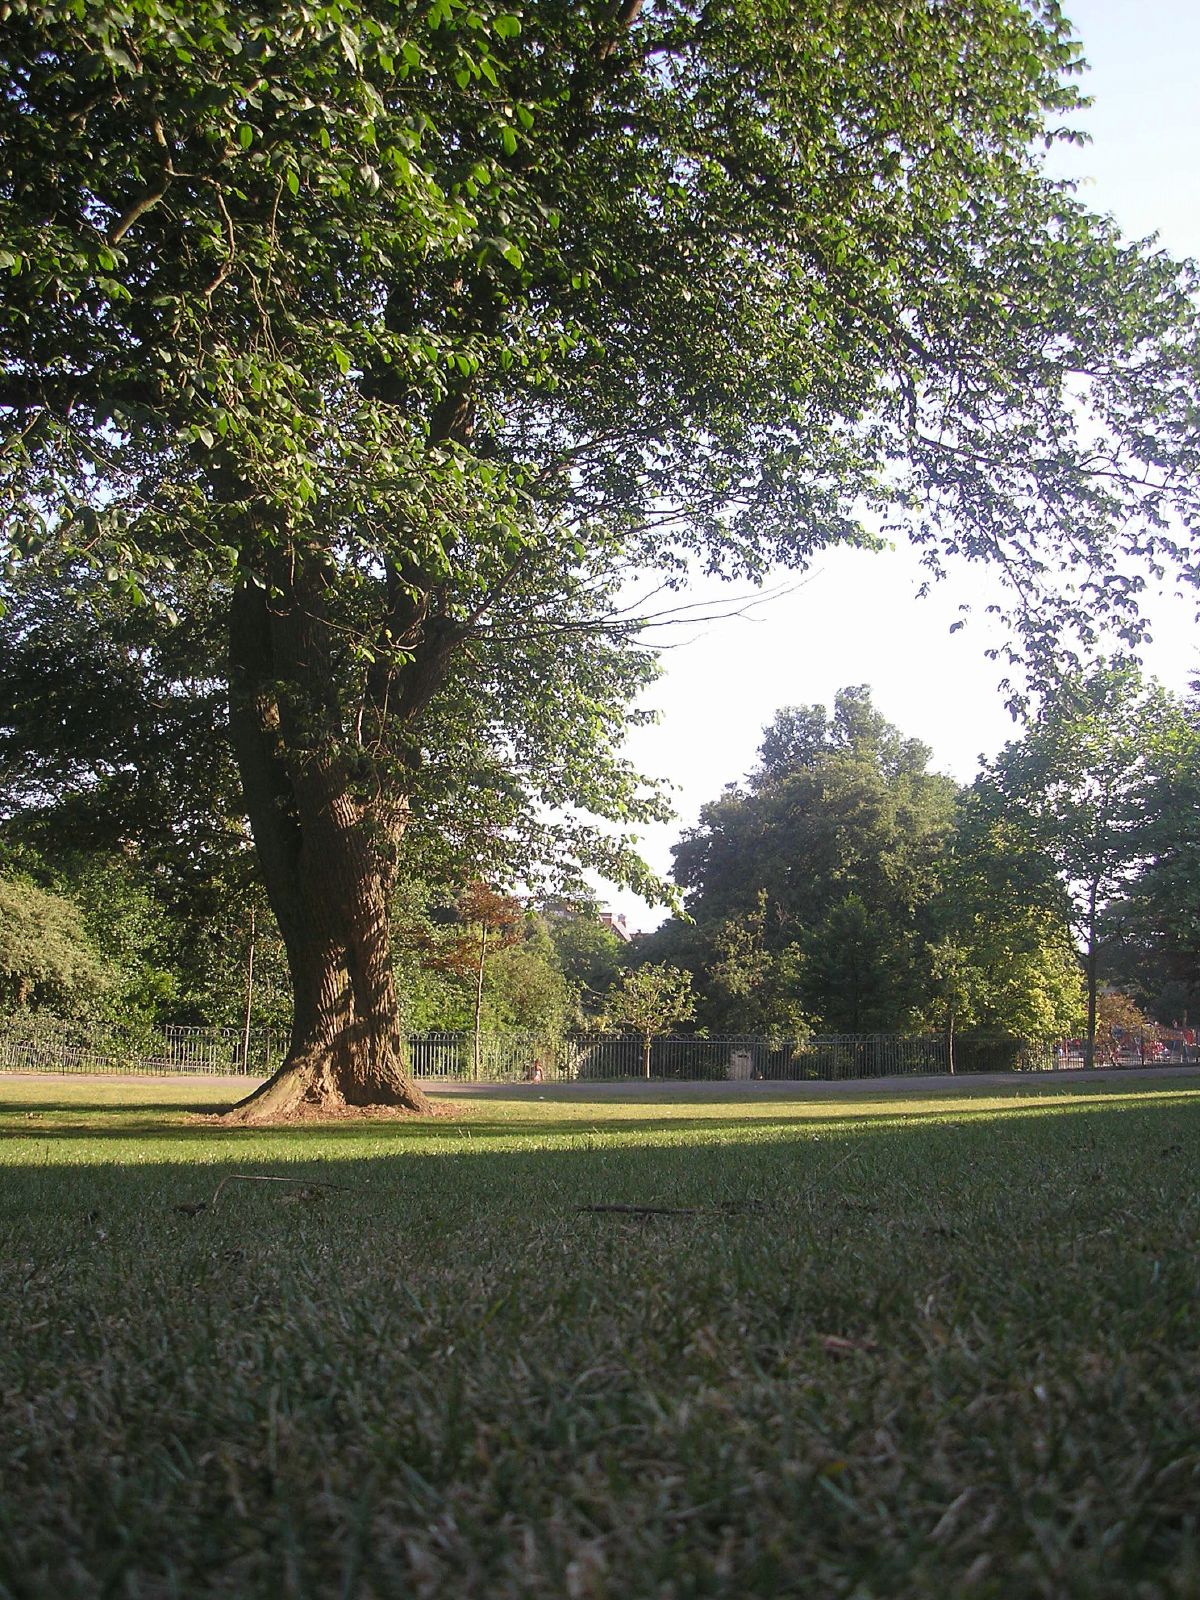 a tree is in the foreground with a fence and grassy area